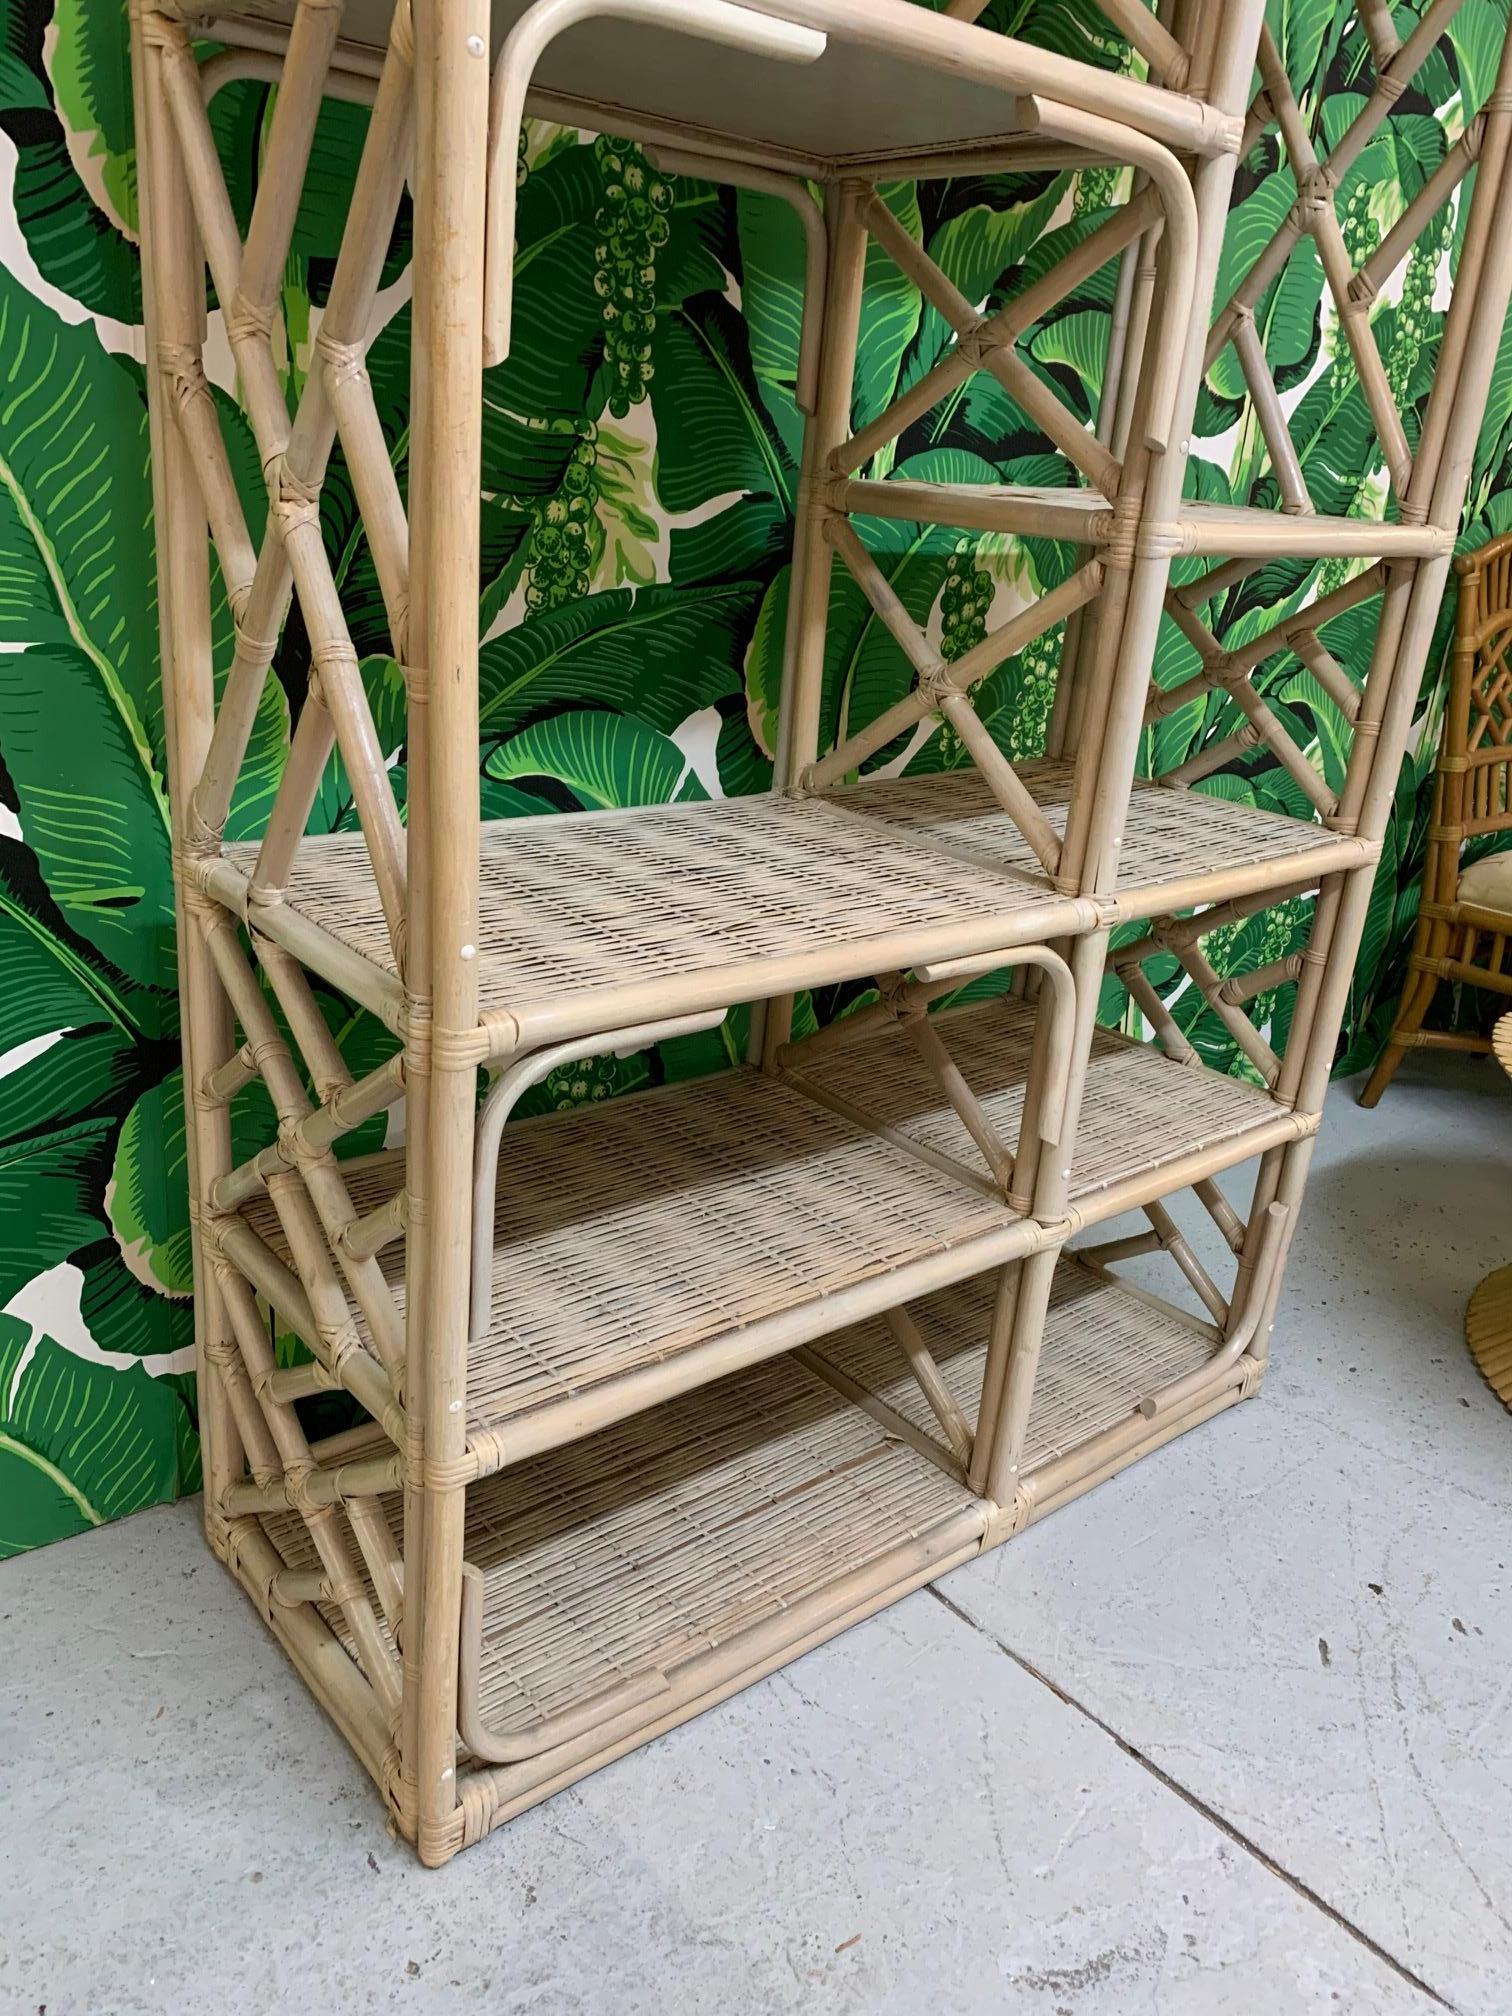 Large rattan étagère features chinoiserie styling and woven wicker shelves. In the manner of Bielecky Brothers. Plenty of storage with tropical bamboo styling. Good condition with only minor imperfections consistent with age.